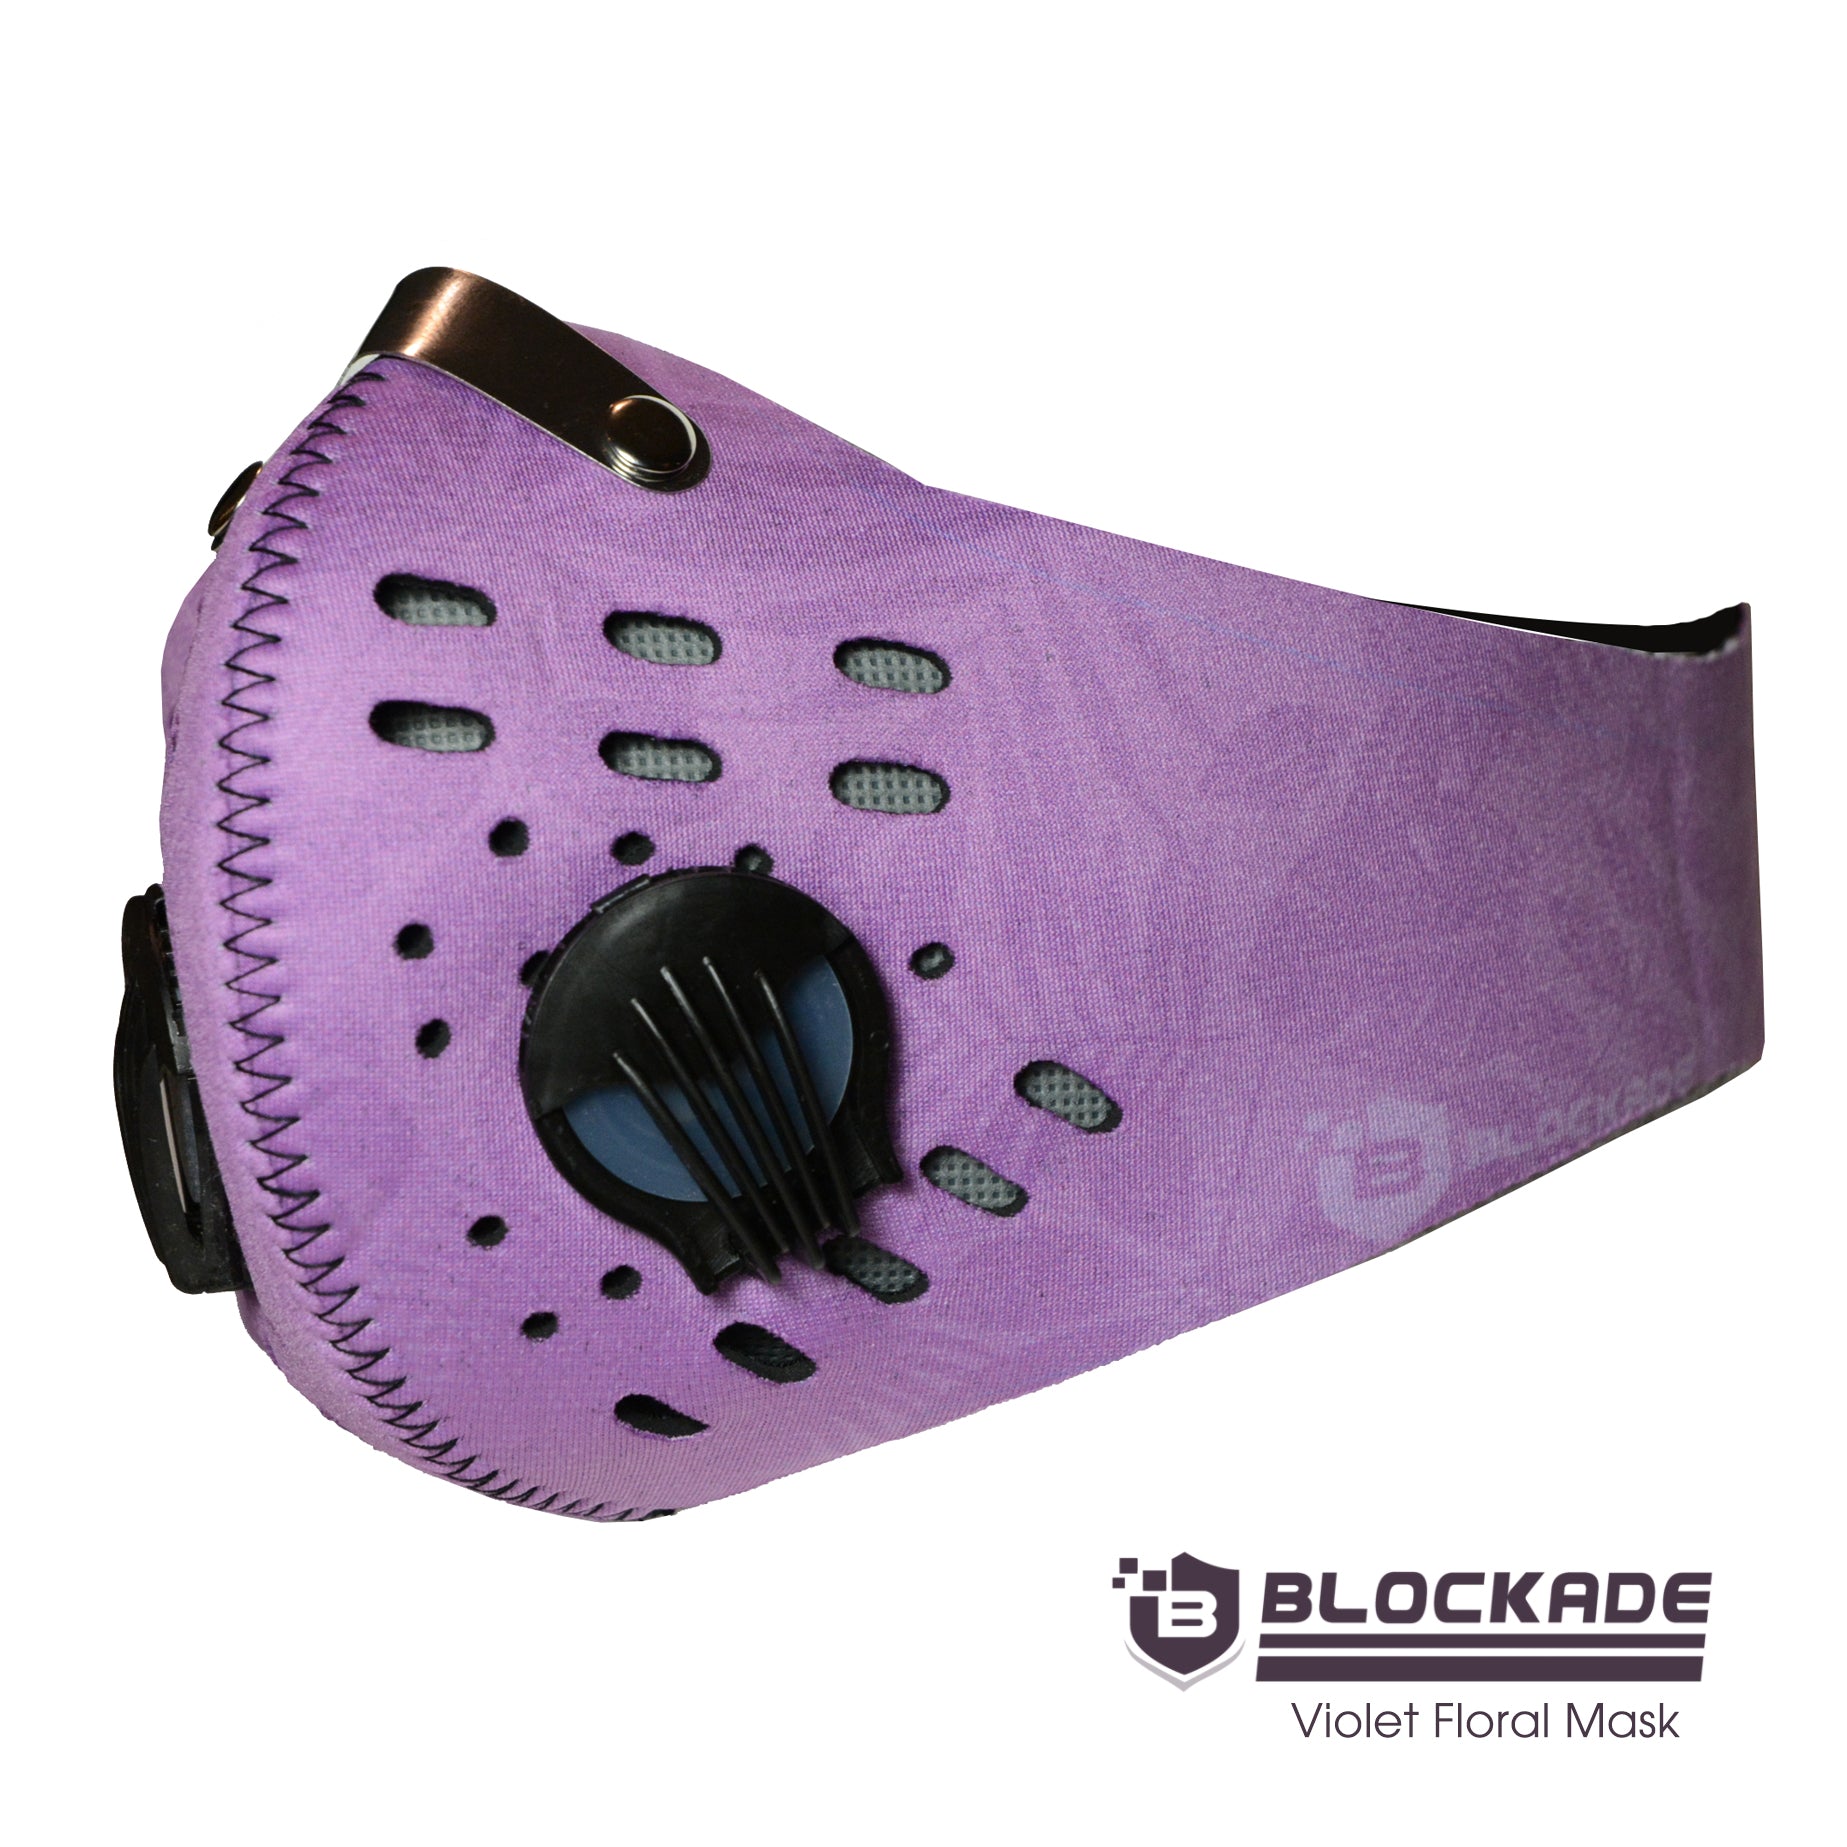 Face Mask with removable filter and exhale valves Black - Camo - Desert Camo Face Mask Violet Floral